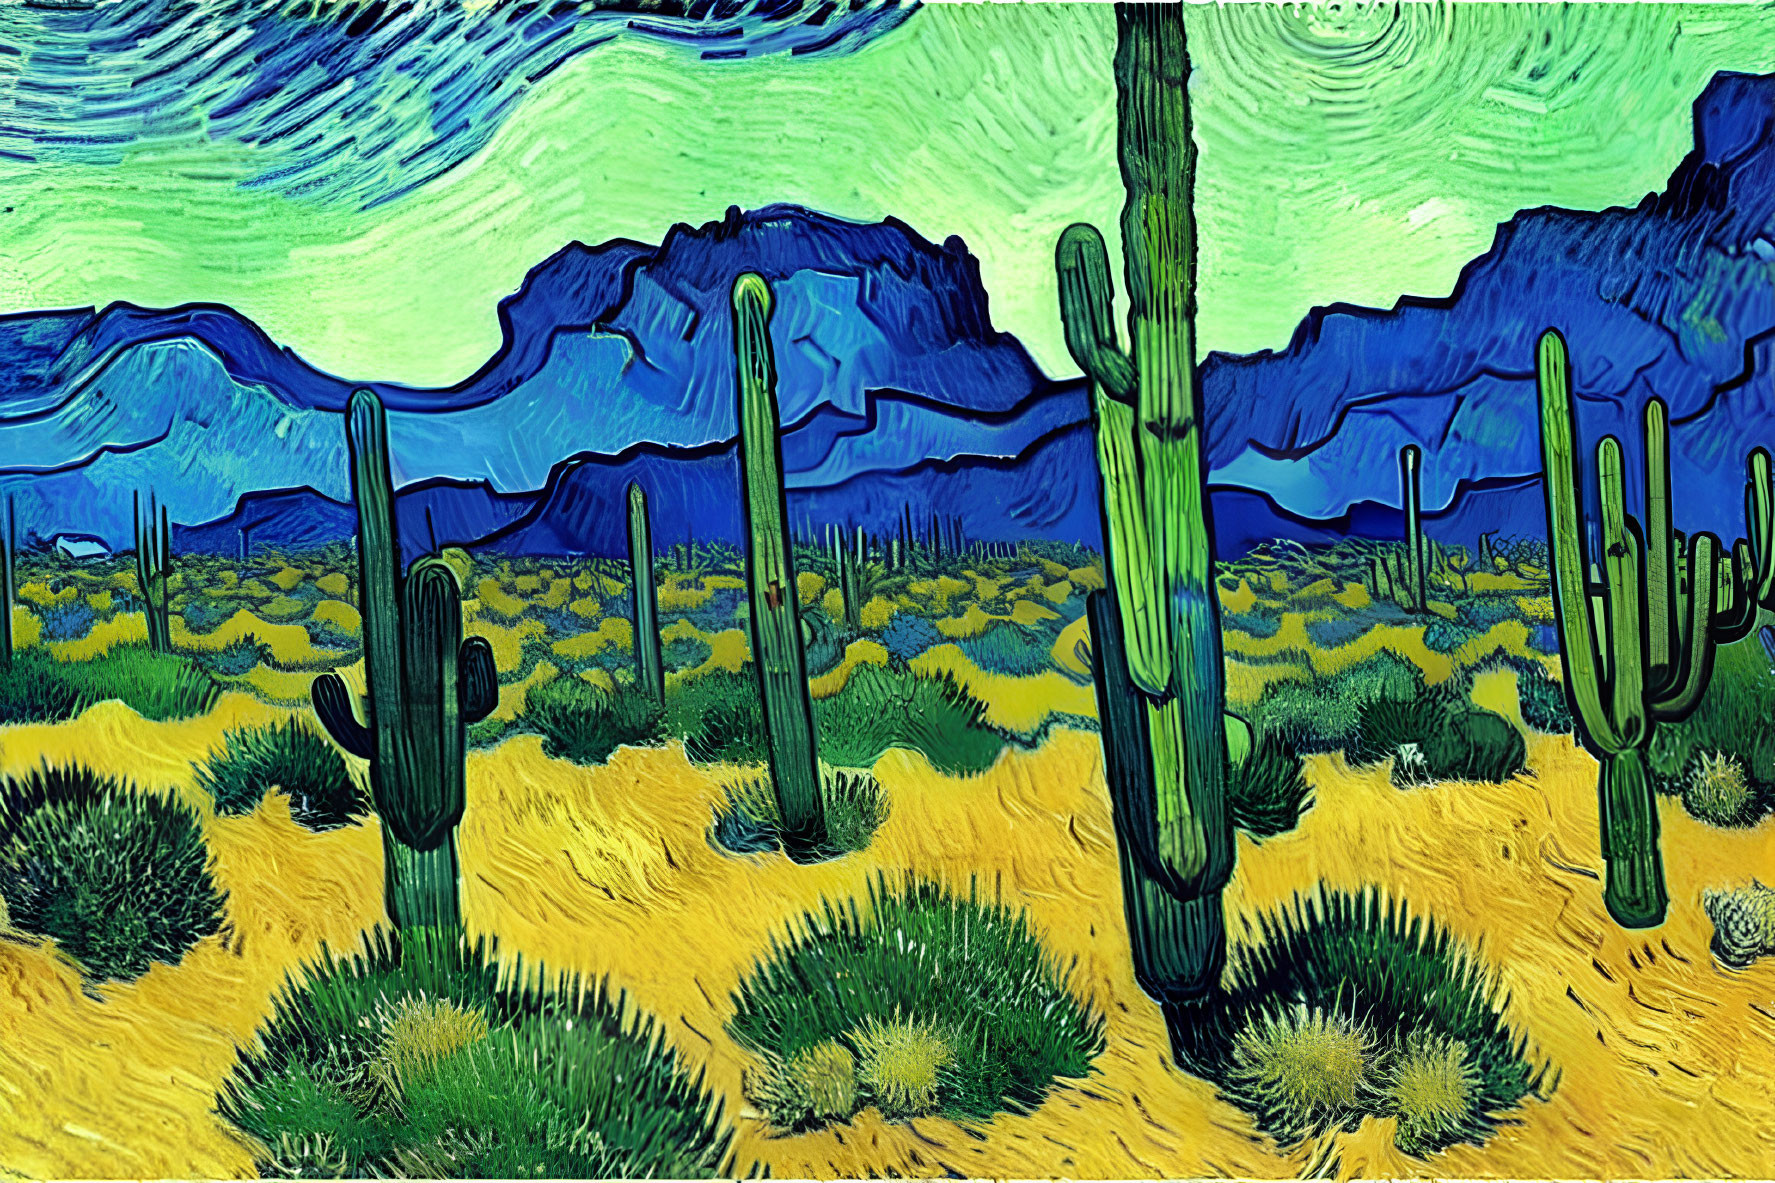 Colorful desert painting with cacti, swirling sky, and blue mountains